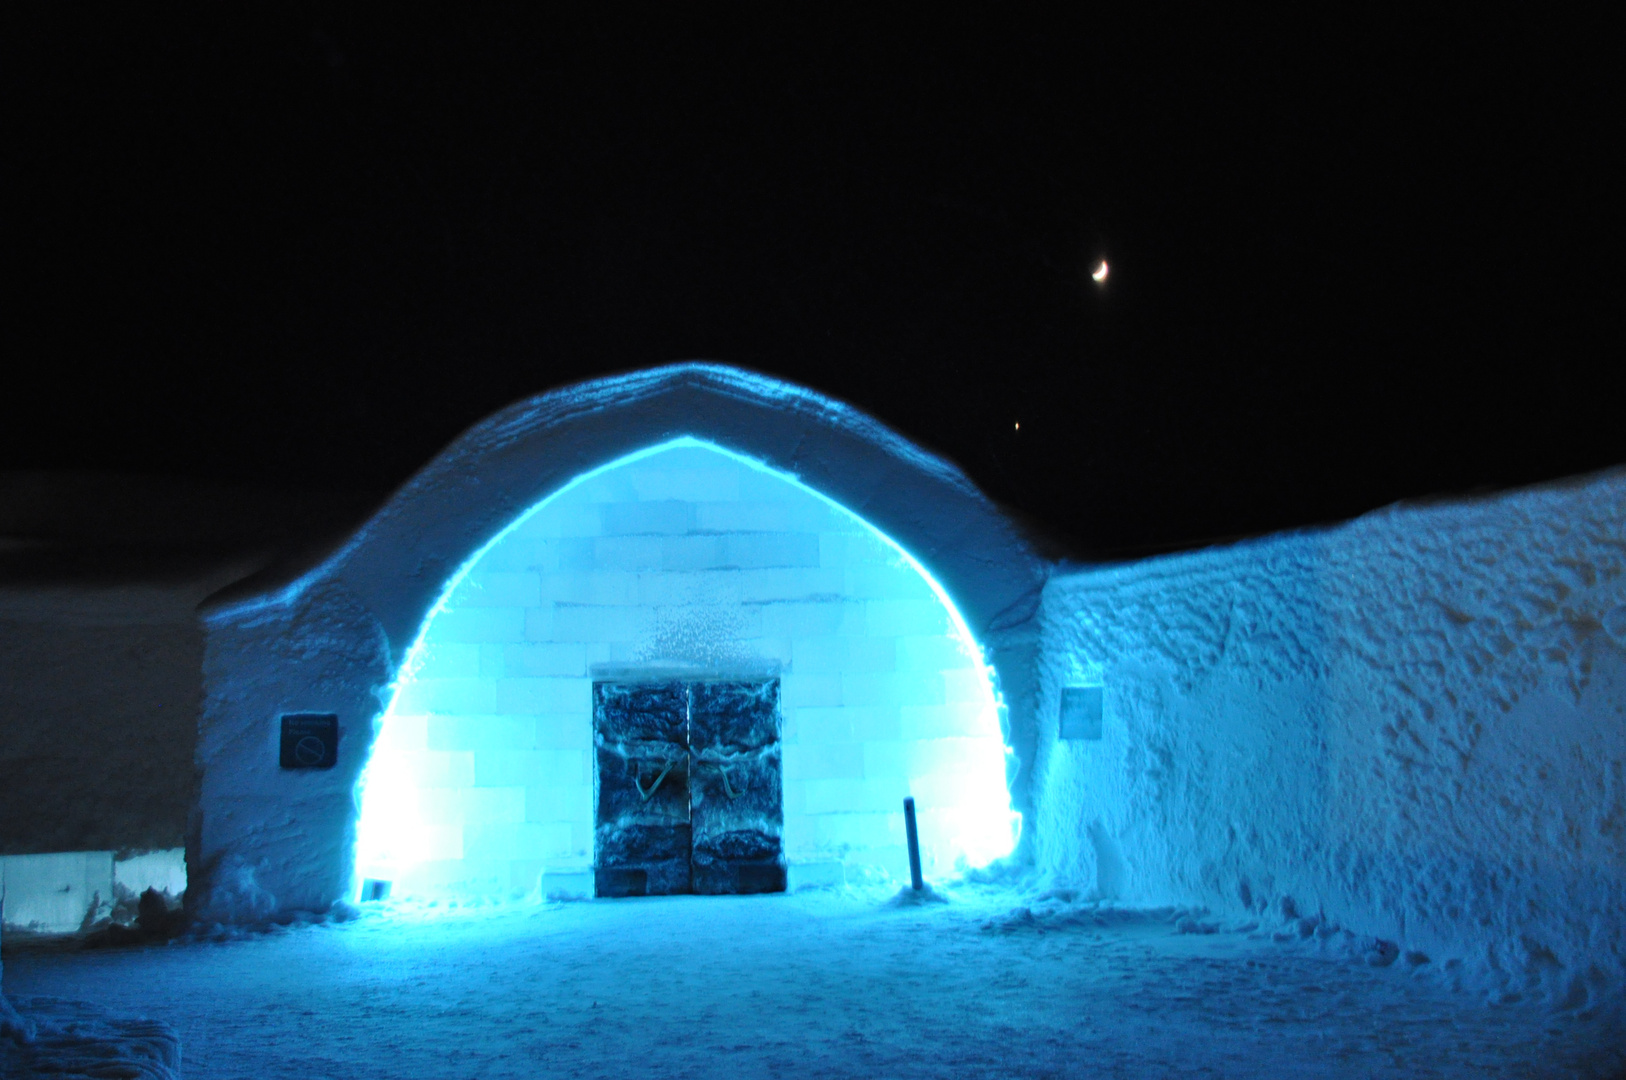 Icehotel - entrance